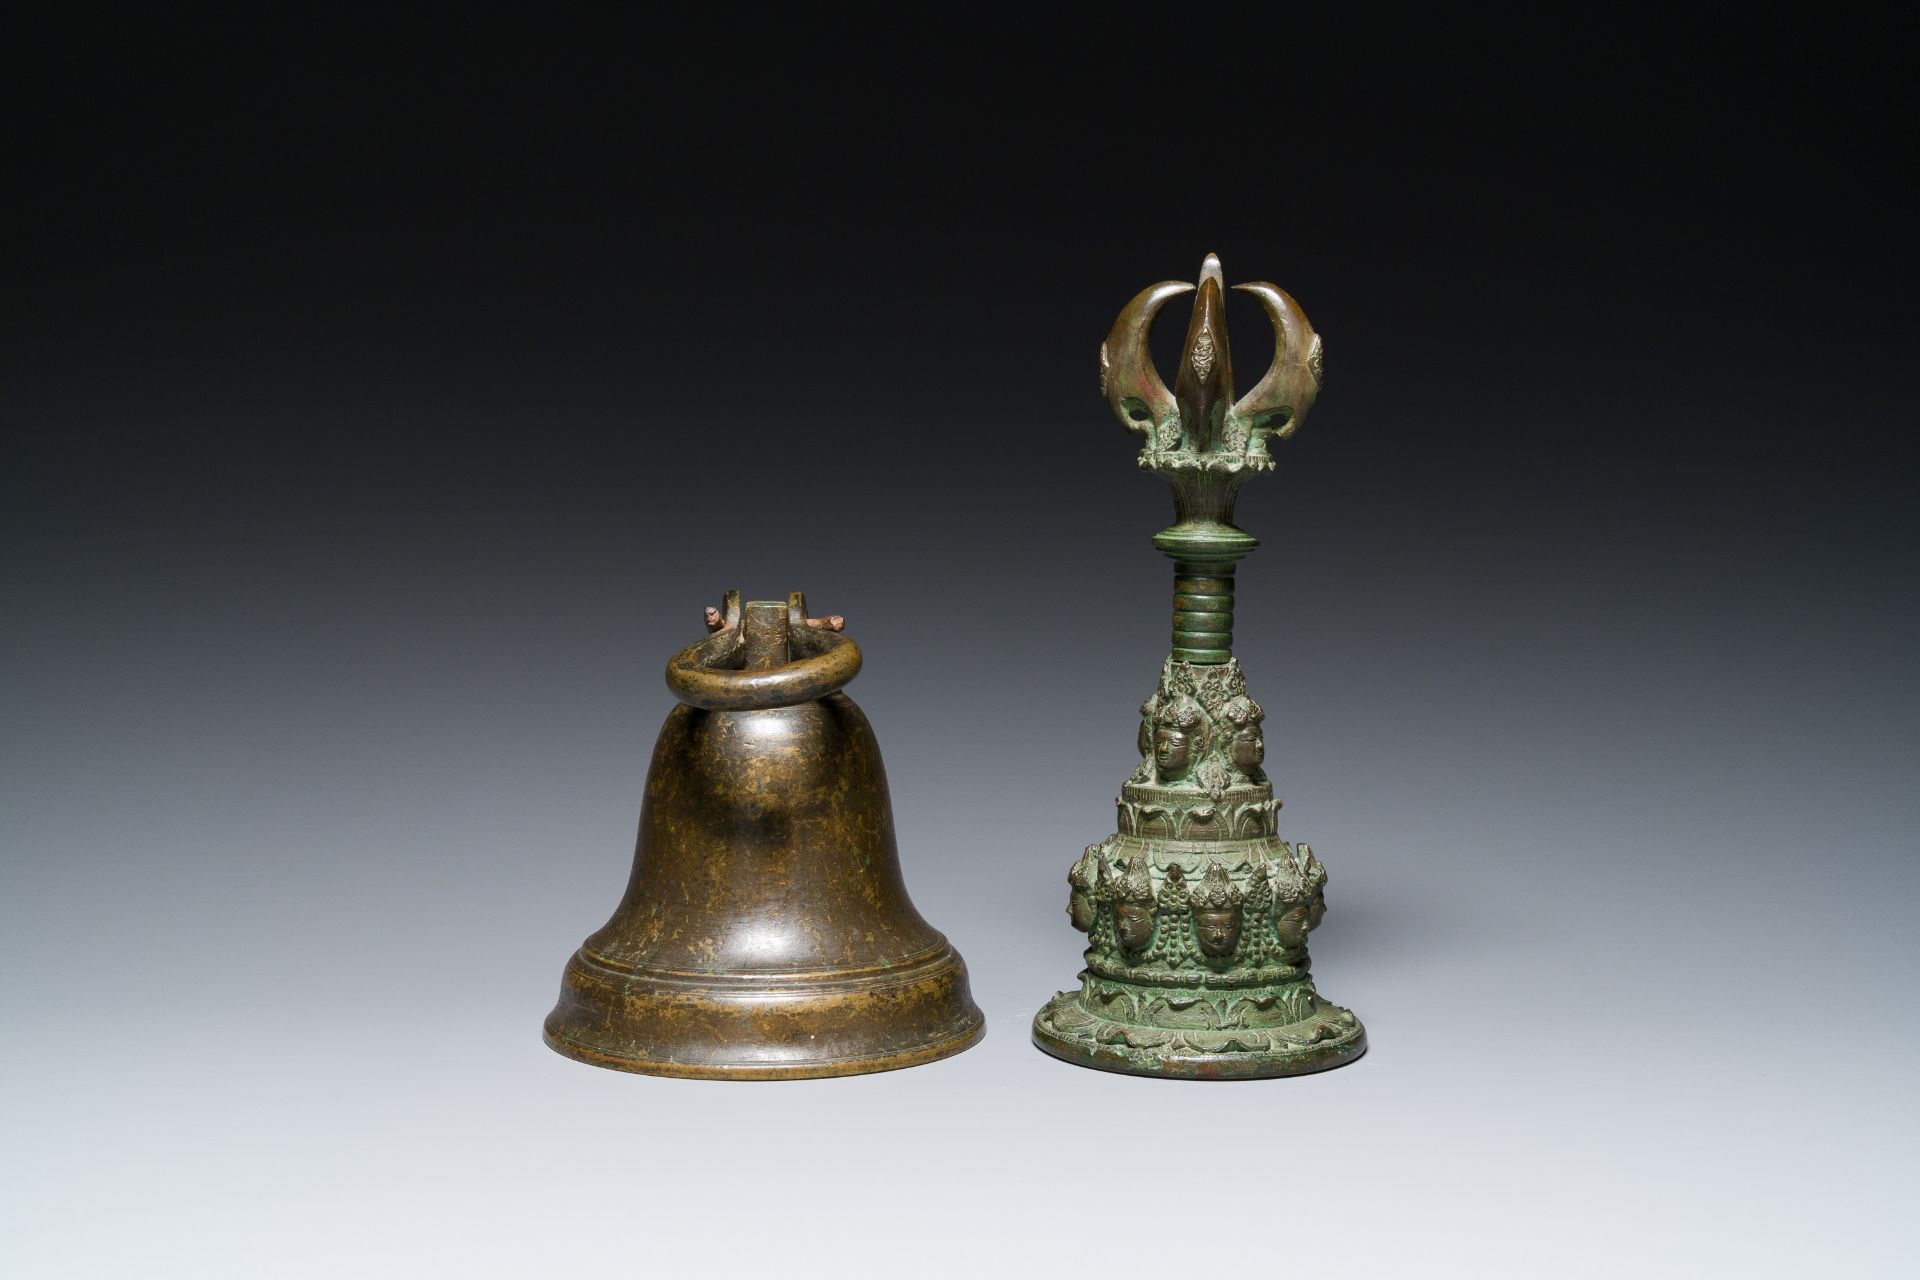 A bronze bell and a ceremonial hand bell, South Asia and Southeast Asia, 19th C. or earlier - Bild 11 aus 21